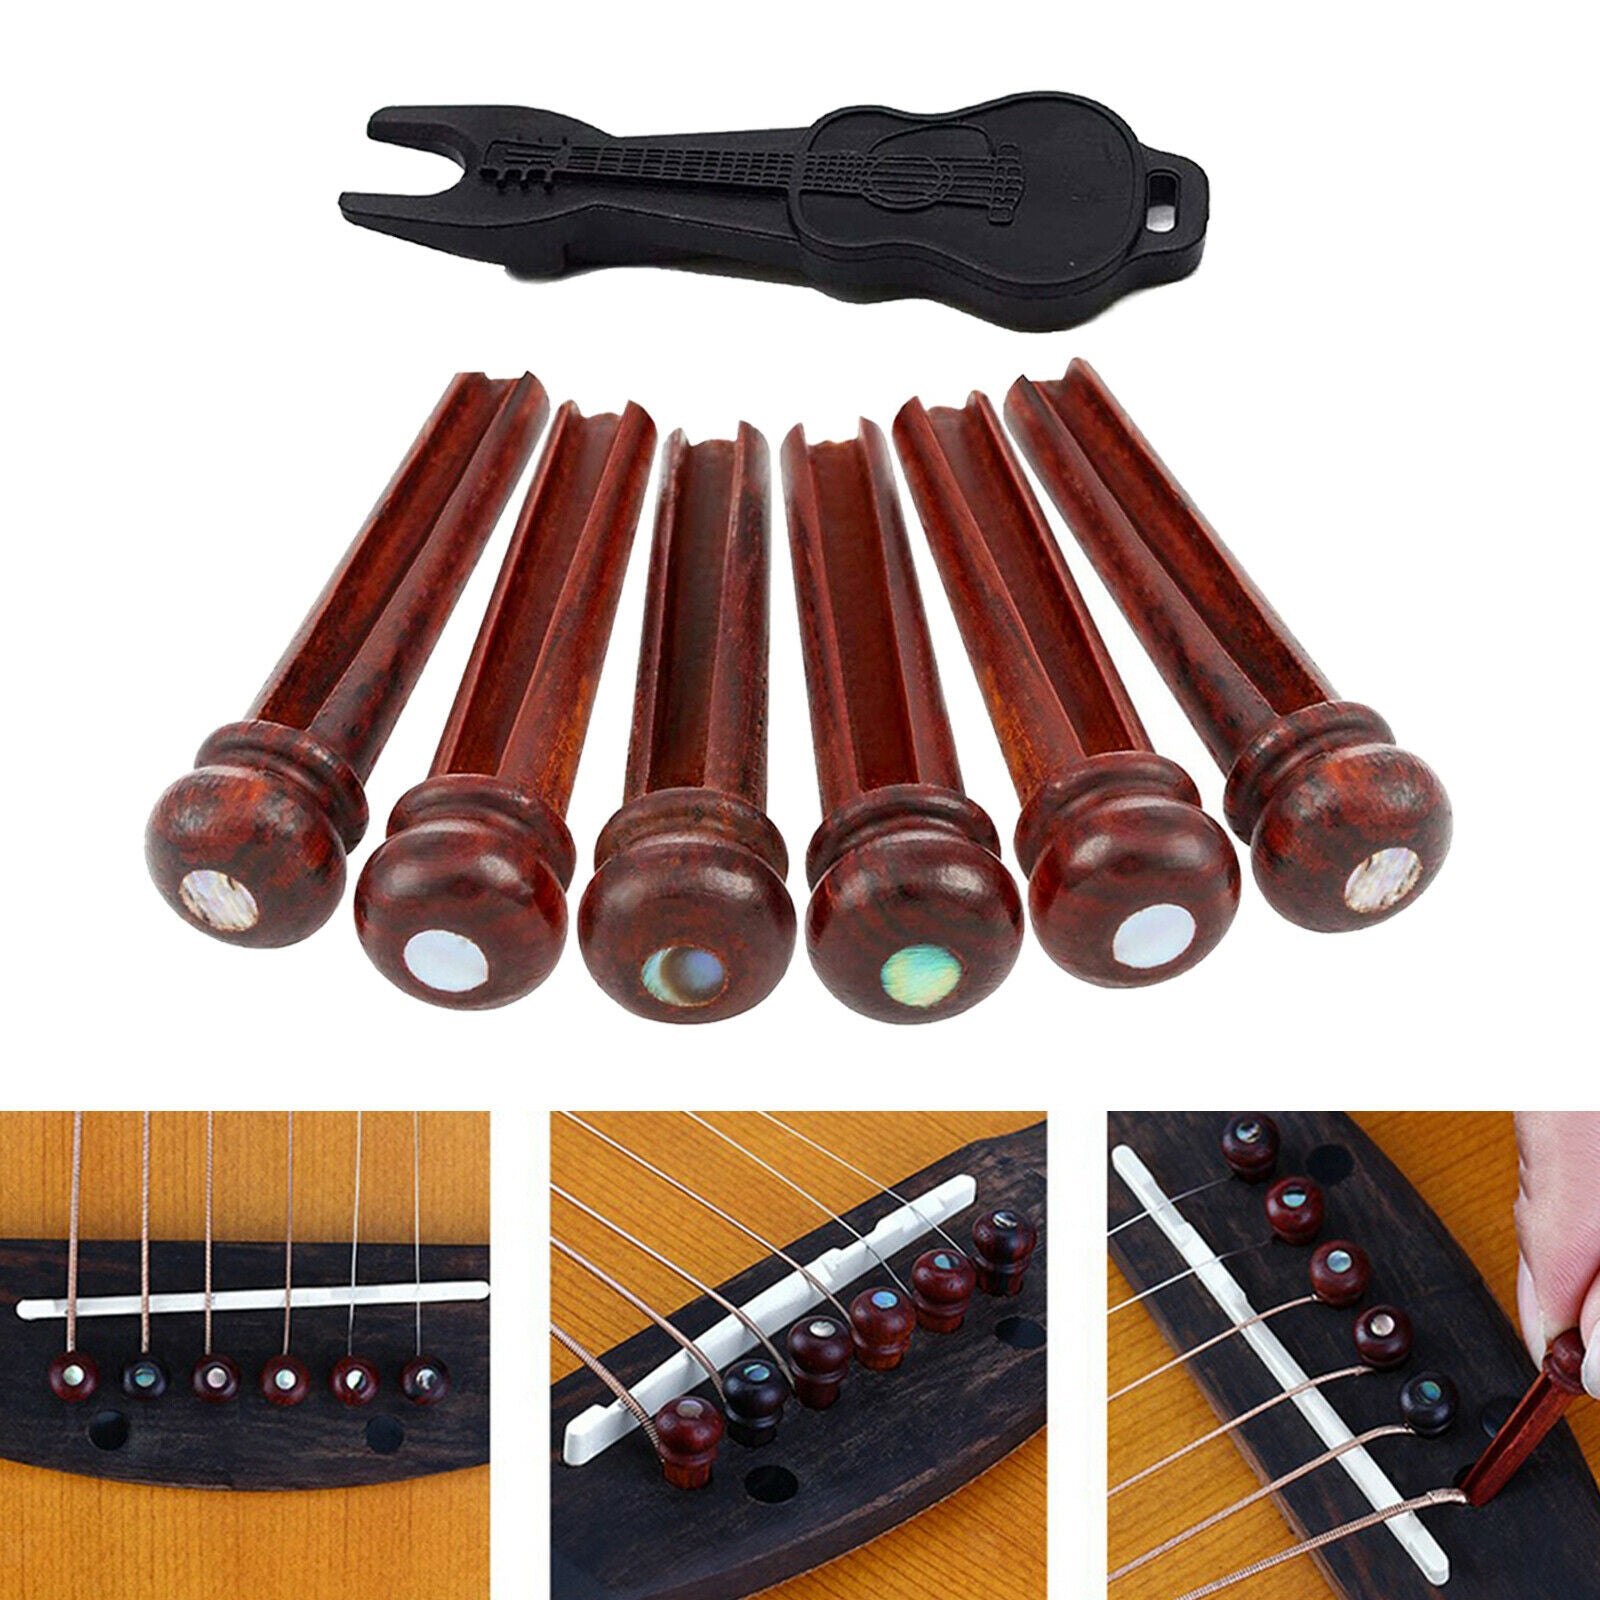 6 Pieces Wooden Guitars Stakes Pegs Ukulele String Repairing Accessories